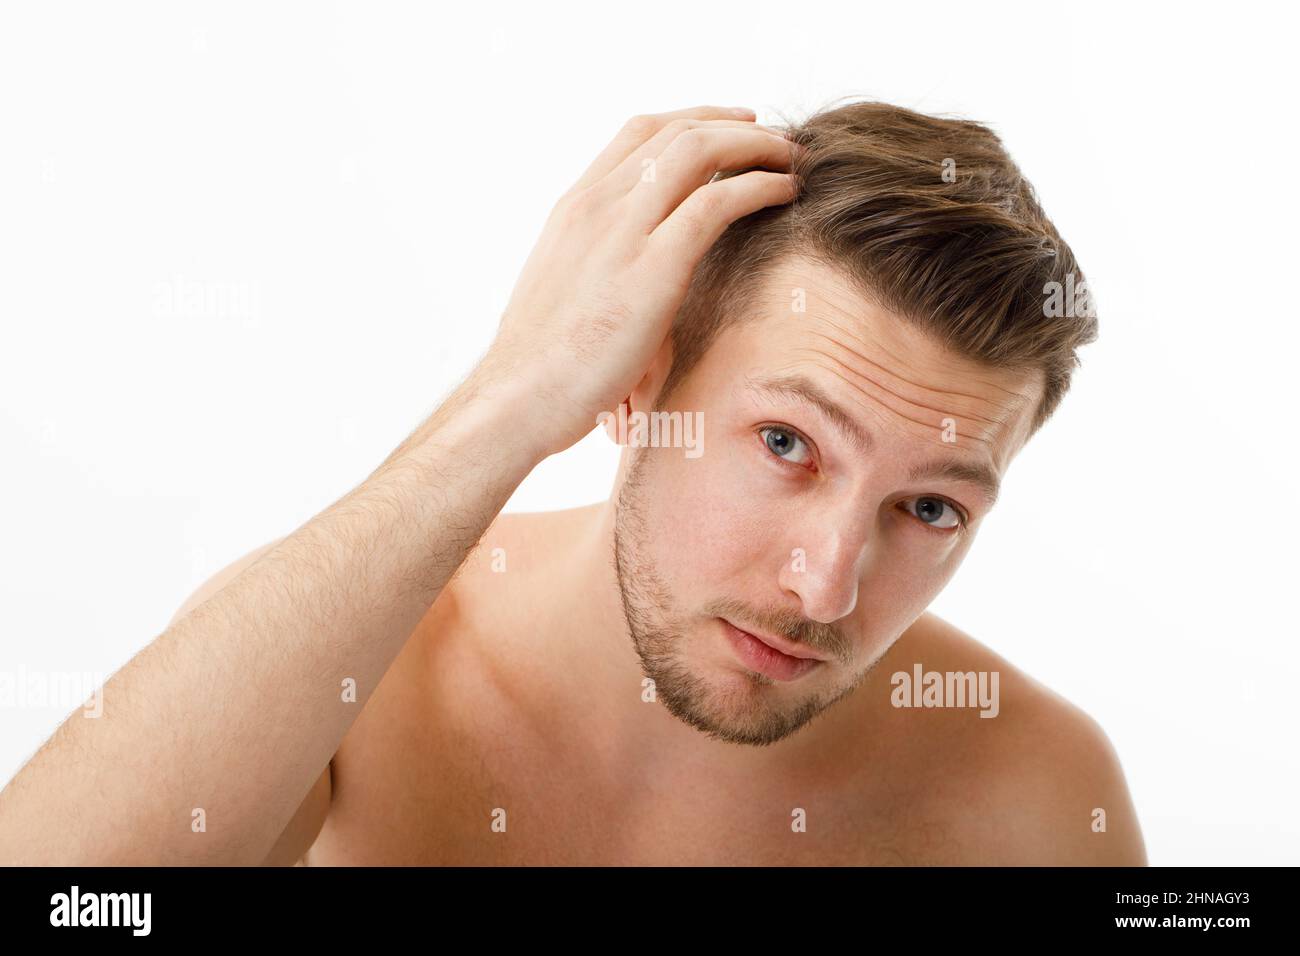 The young man was upset when he noticed his gray hair. Hair care, baldness graying. Stock Photo